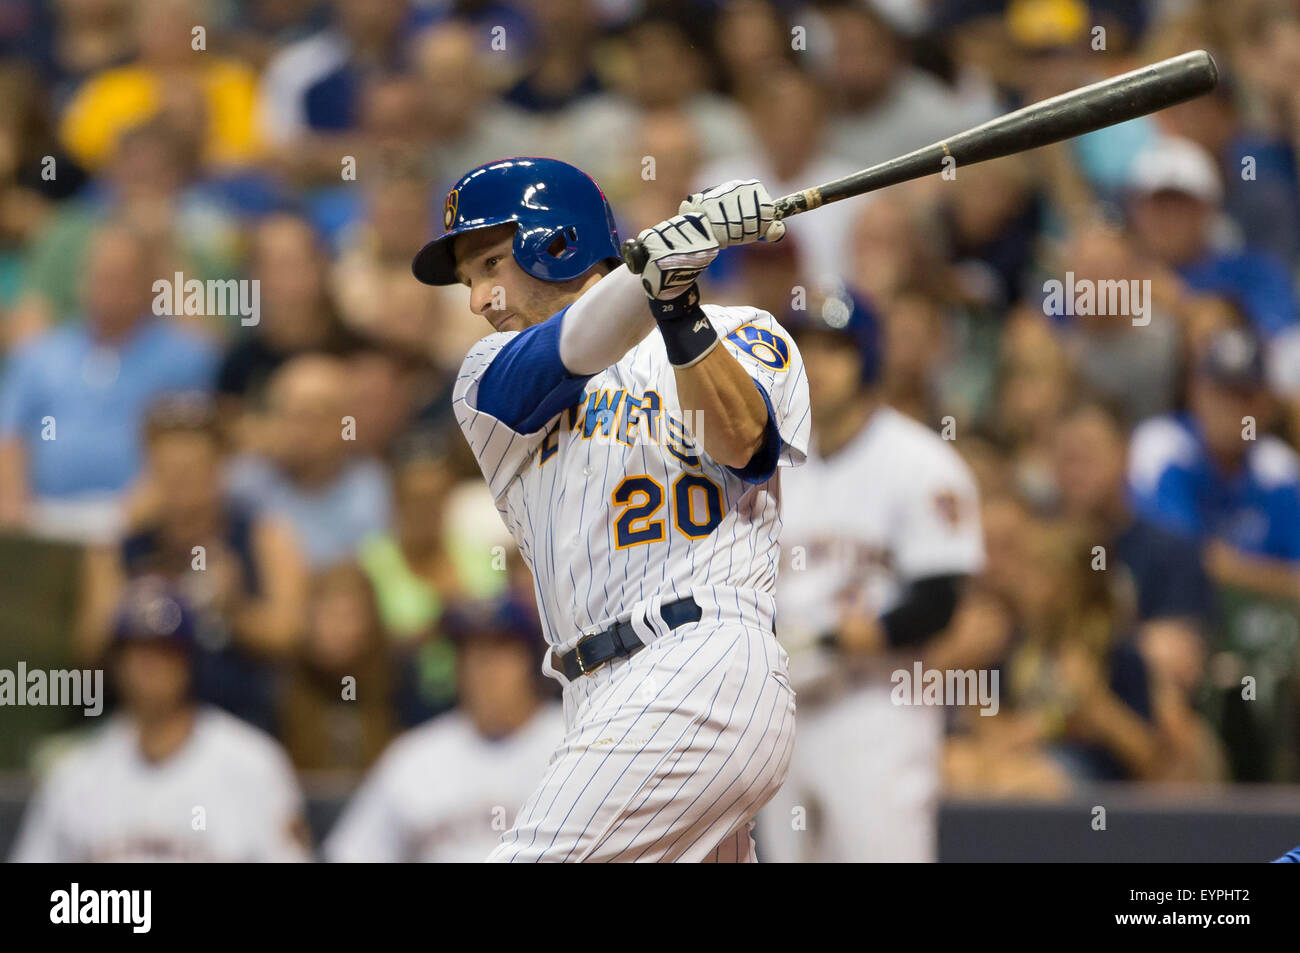 Milwaukee, WI, USA. 31st July, 2015. Milwaukee Brewers catcher Jonathan Lucroy #20 up to bat in the Major League Baseball game between the Milwaukee Brewers and the Chicago Cubs at Miller Park in Milwaukee, WI. John Fisher/CSM/Alamy Live News Stock Photo